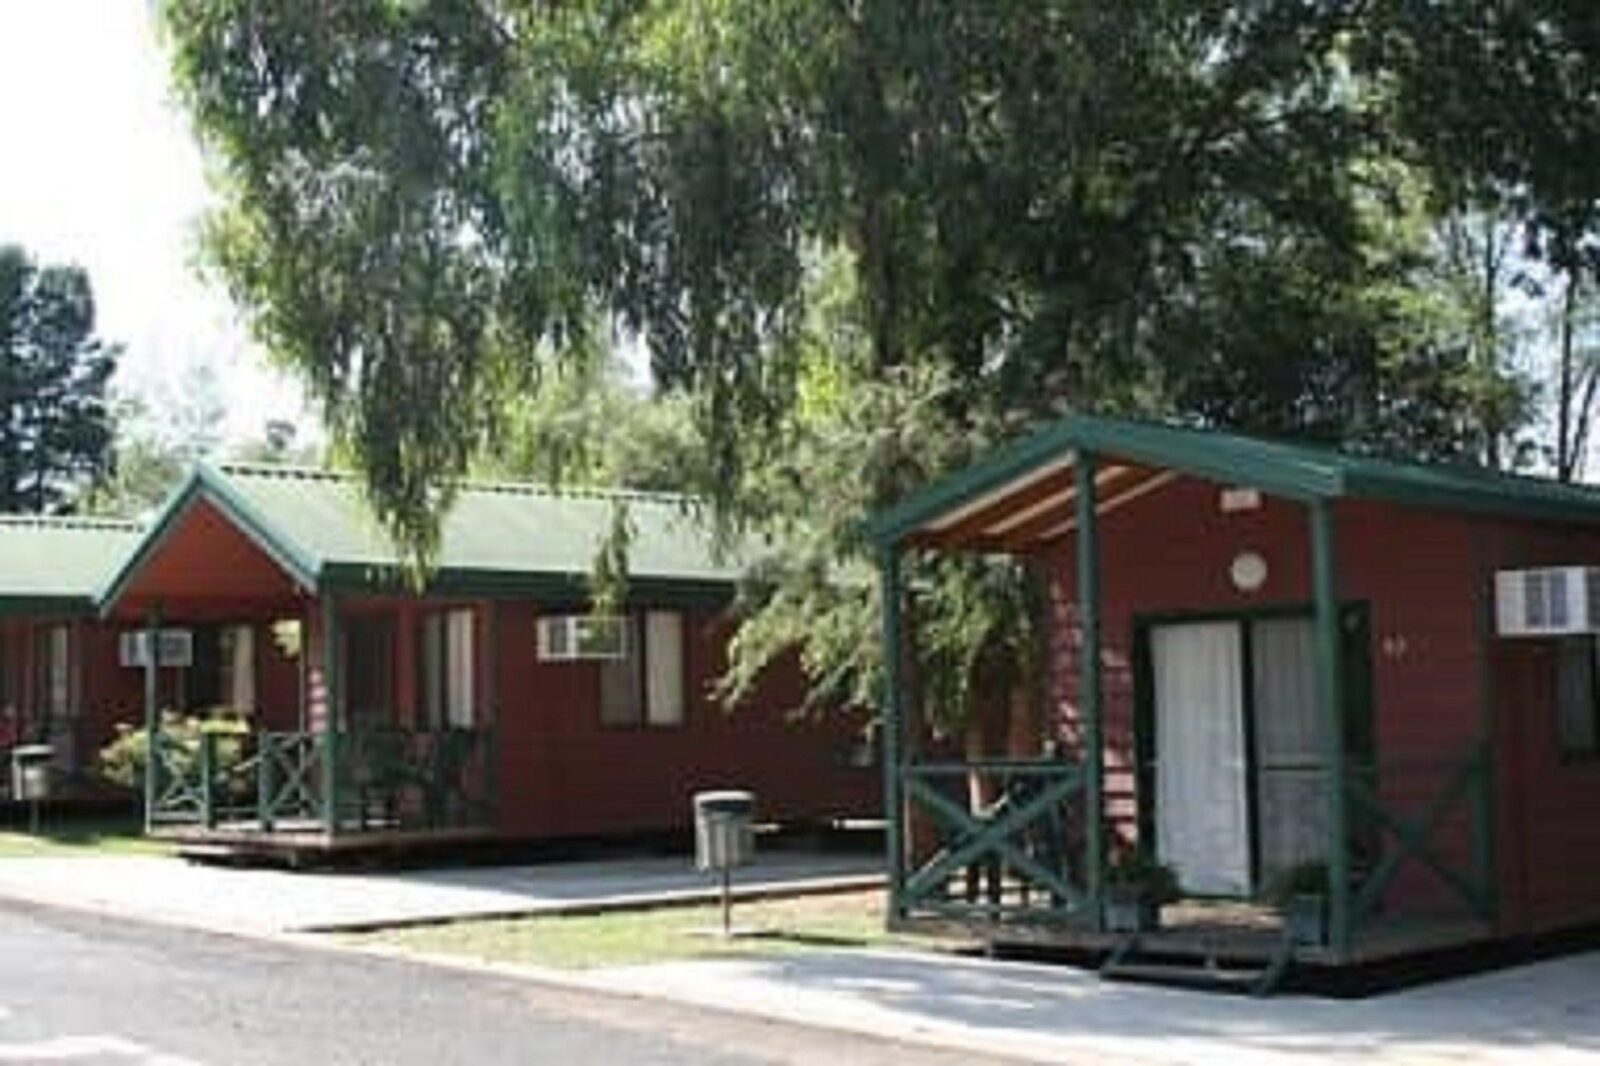 Two Cabins side by side with large shady tree branch hanging over cabin in foreground